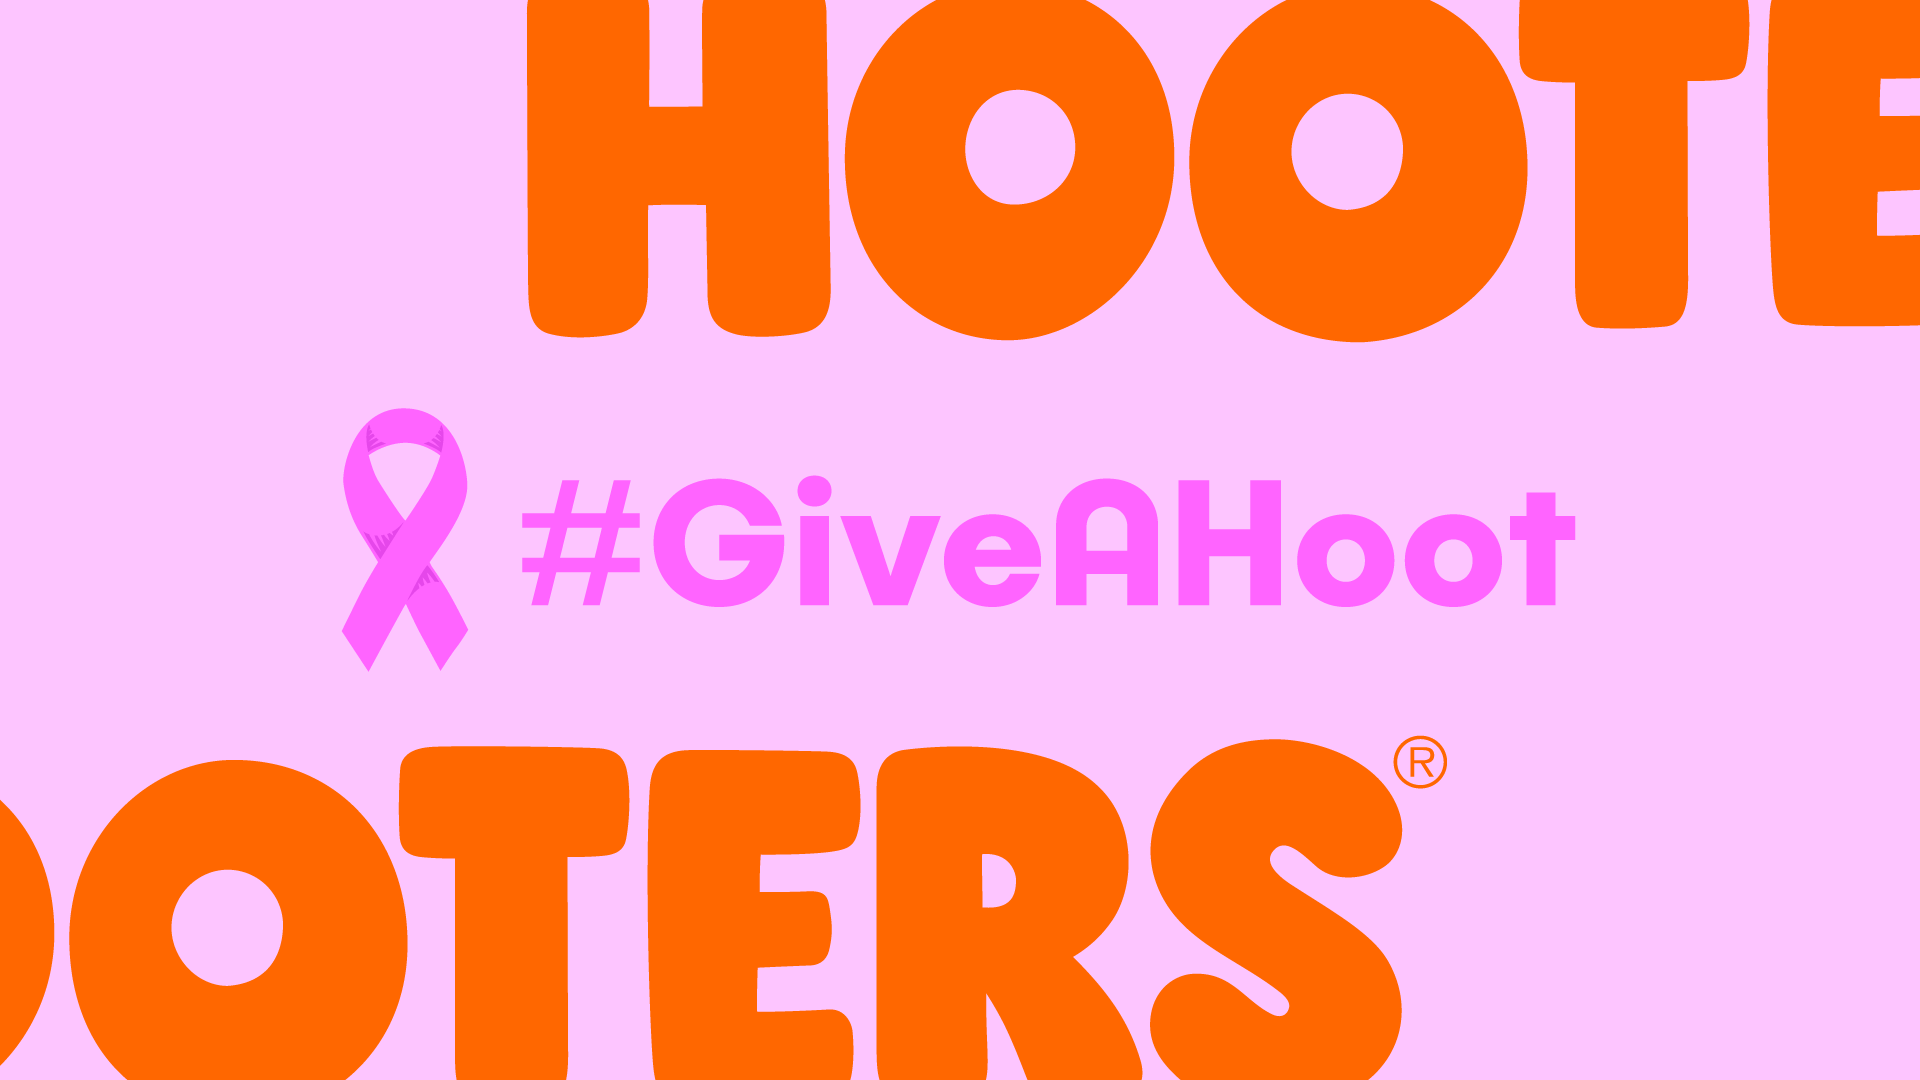 Hooters supports the fight against breast cancer. #GiveAHoot